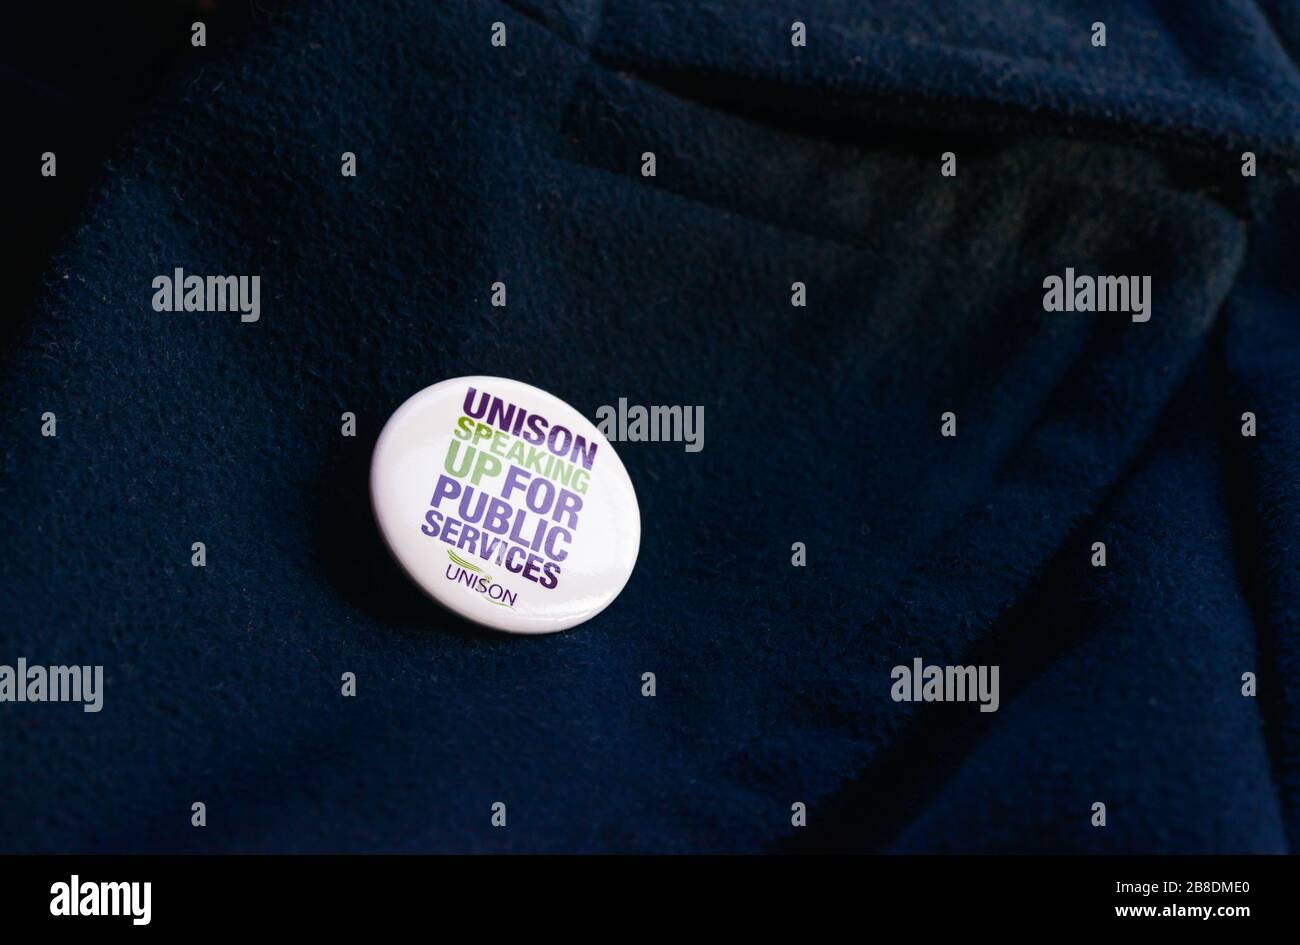 A 'Speaking up for Public Services' UNISON badge attached on a blue jacket Stock Photo